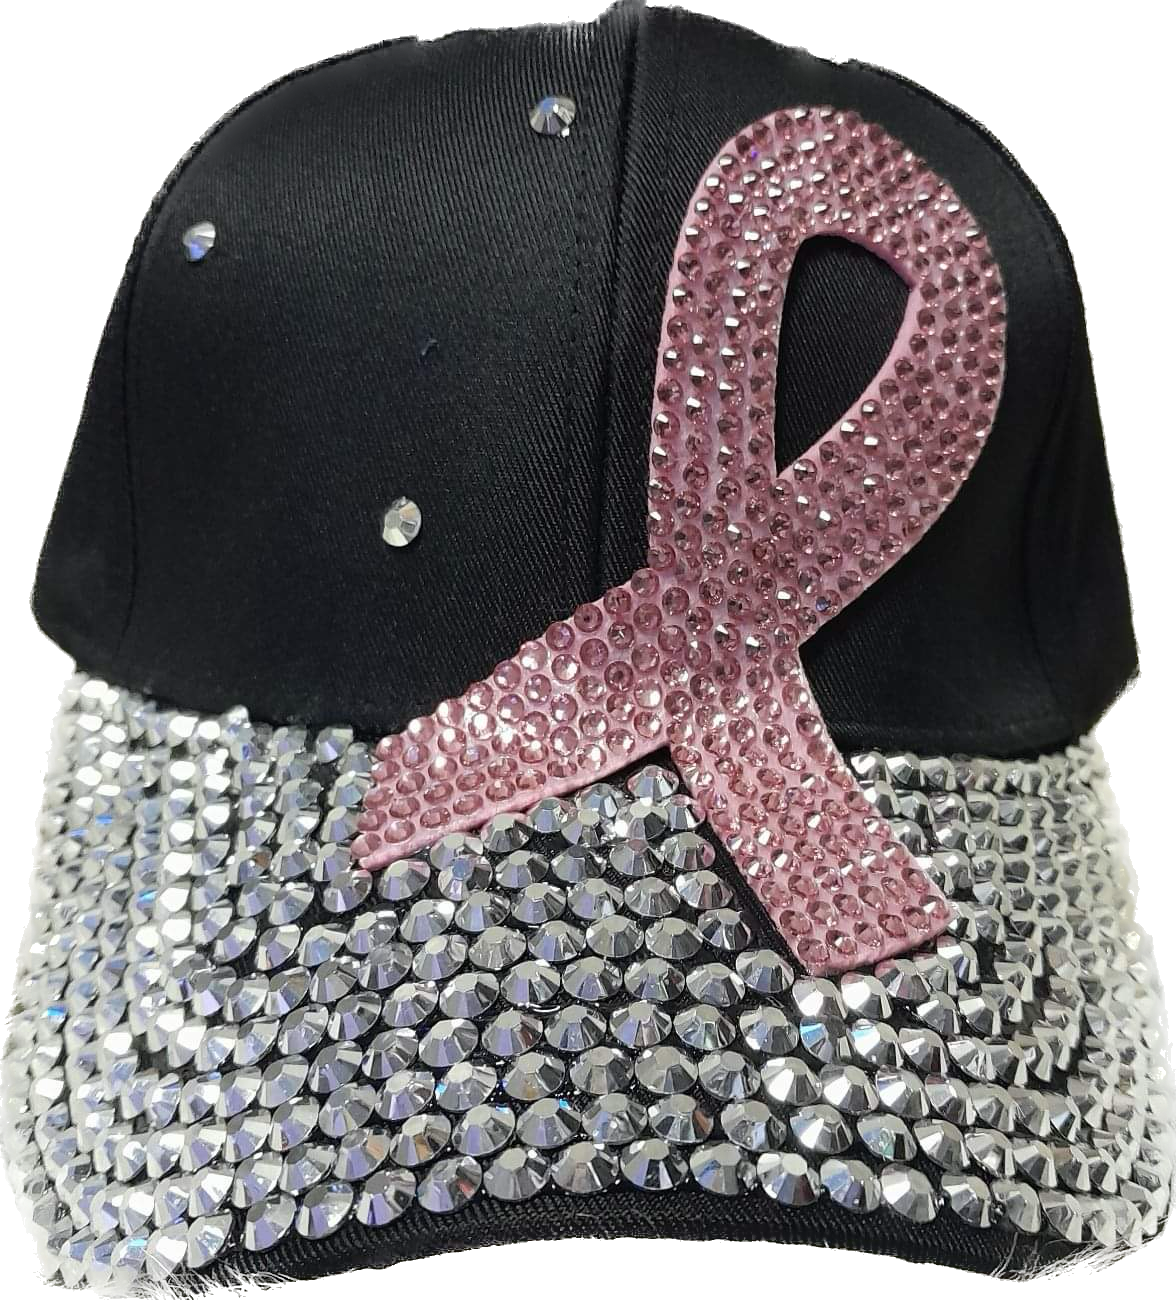 Black Breast Cancer Awareness Hat with Rhinestones